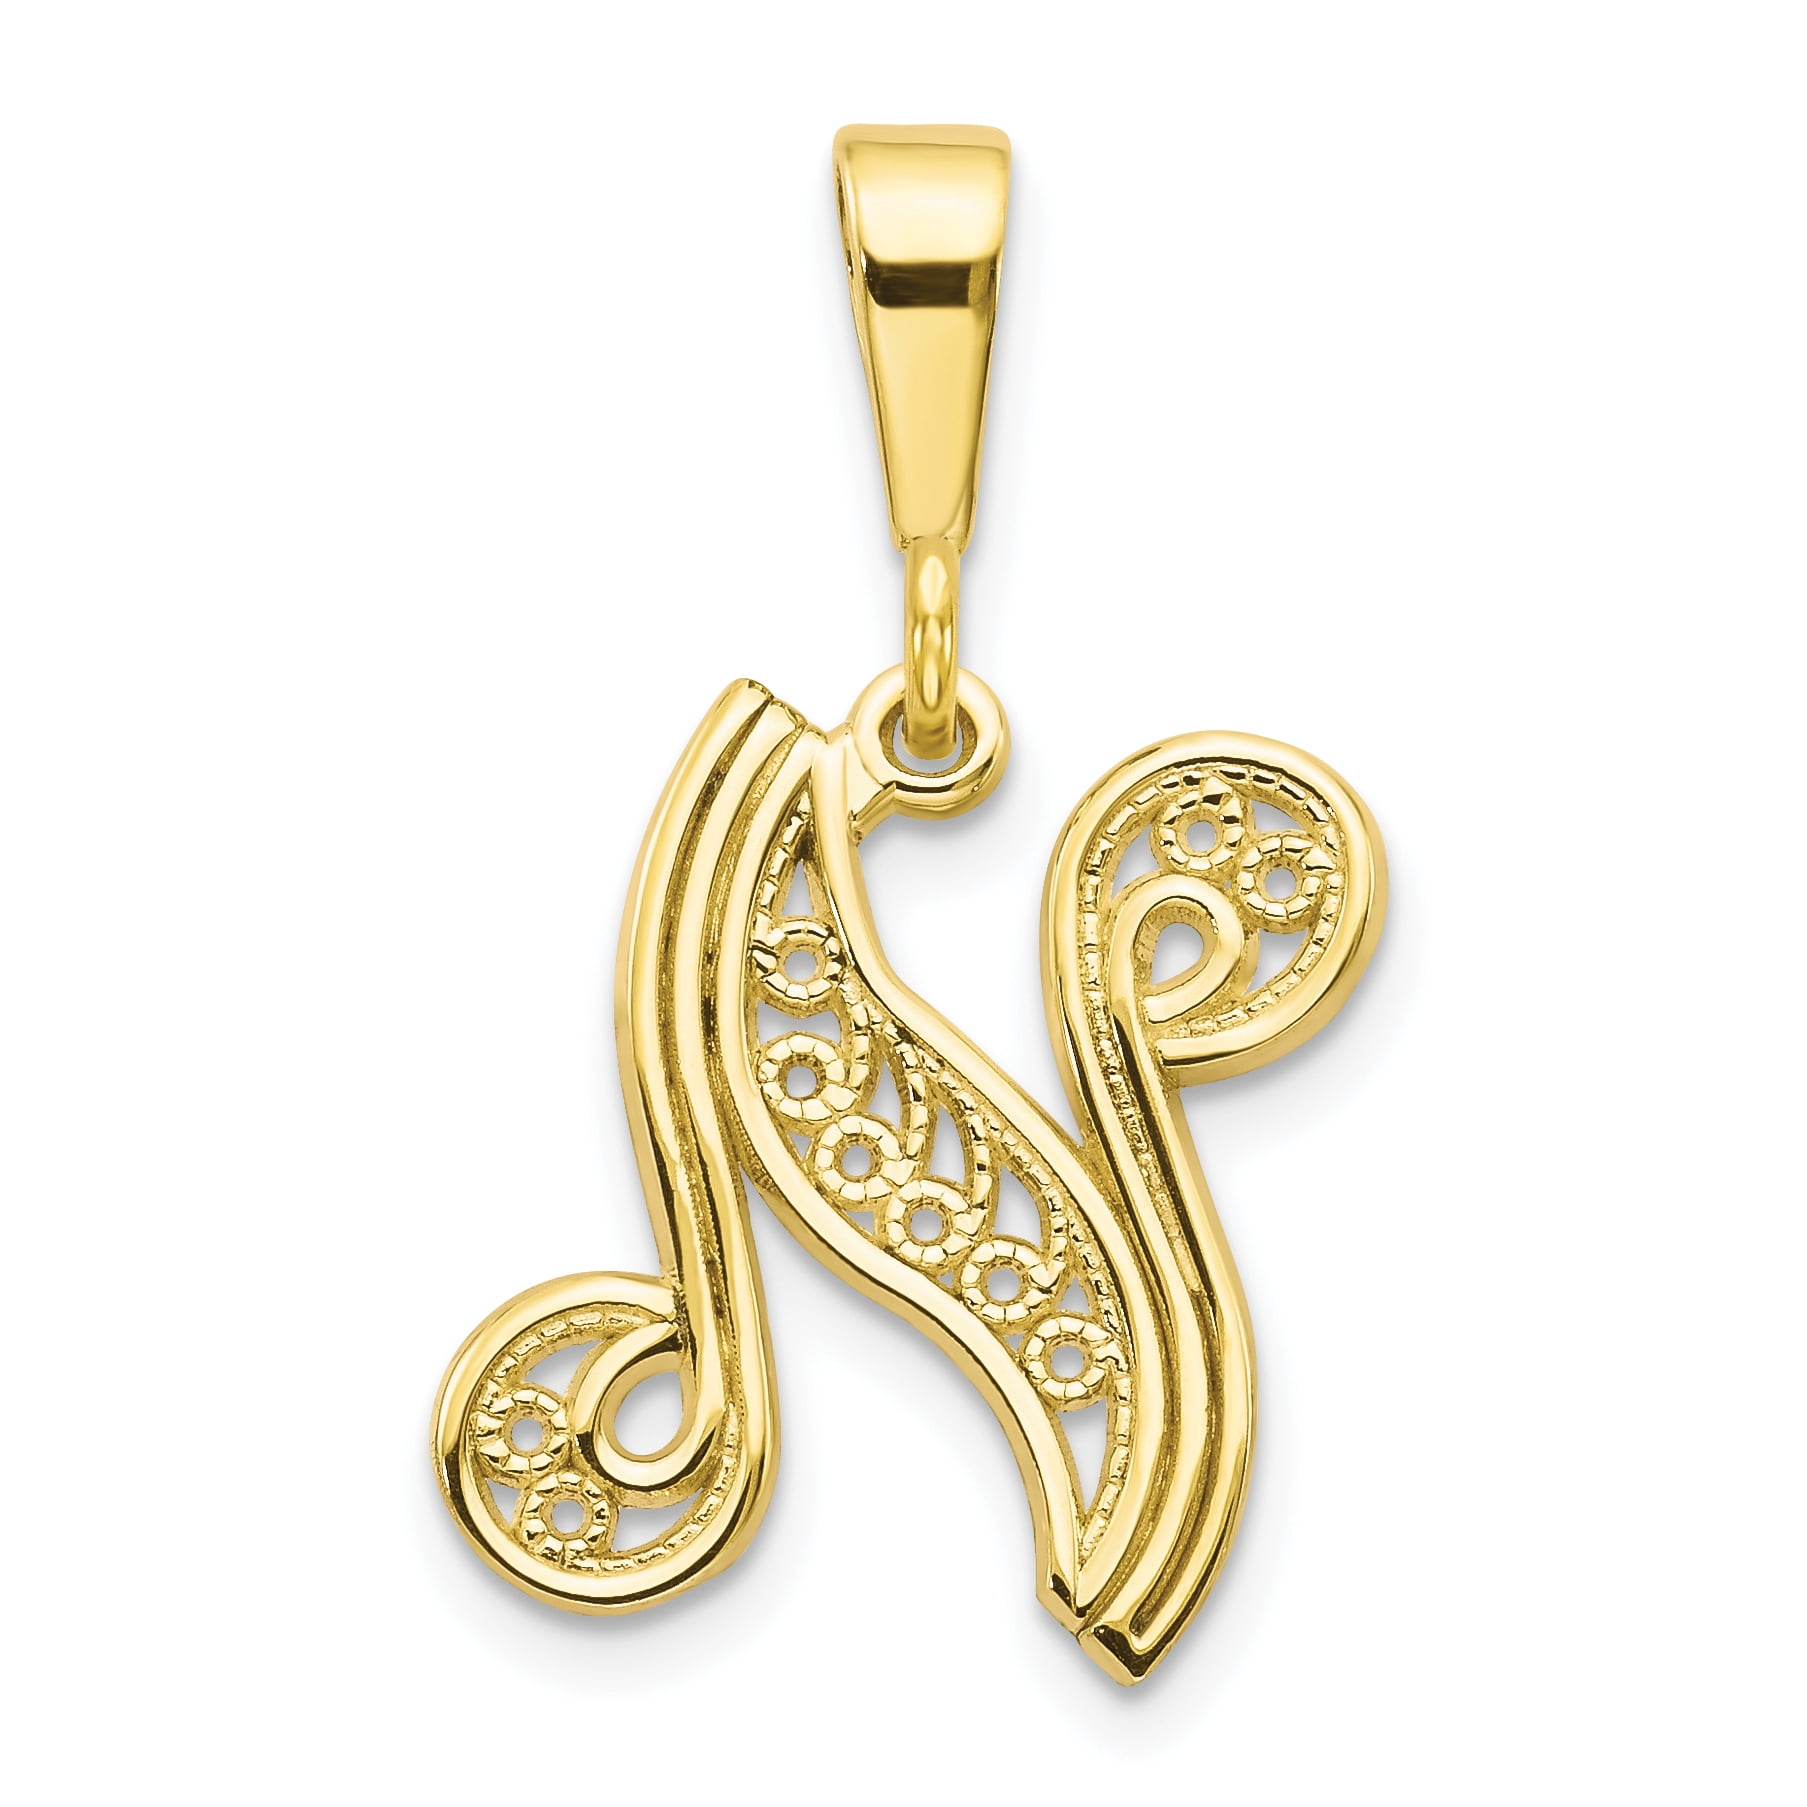 10K Yellow Gold Initial D Charm Pendant MSRP $69 